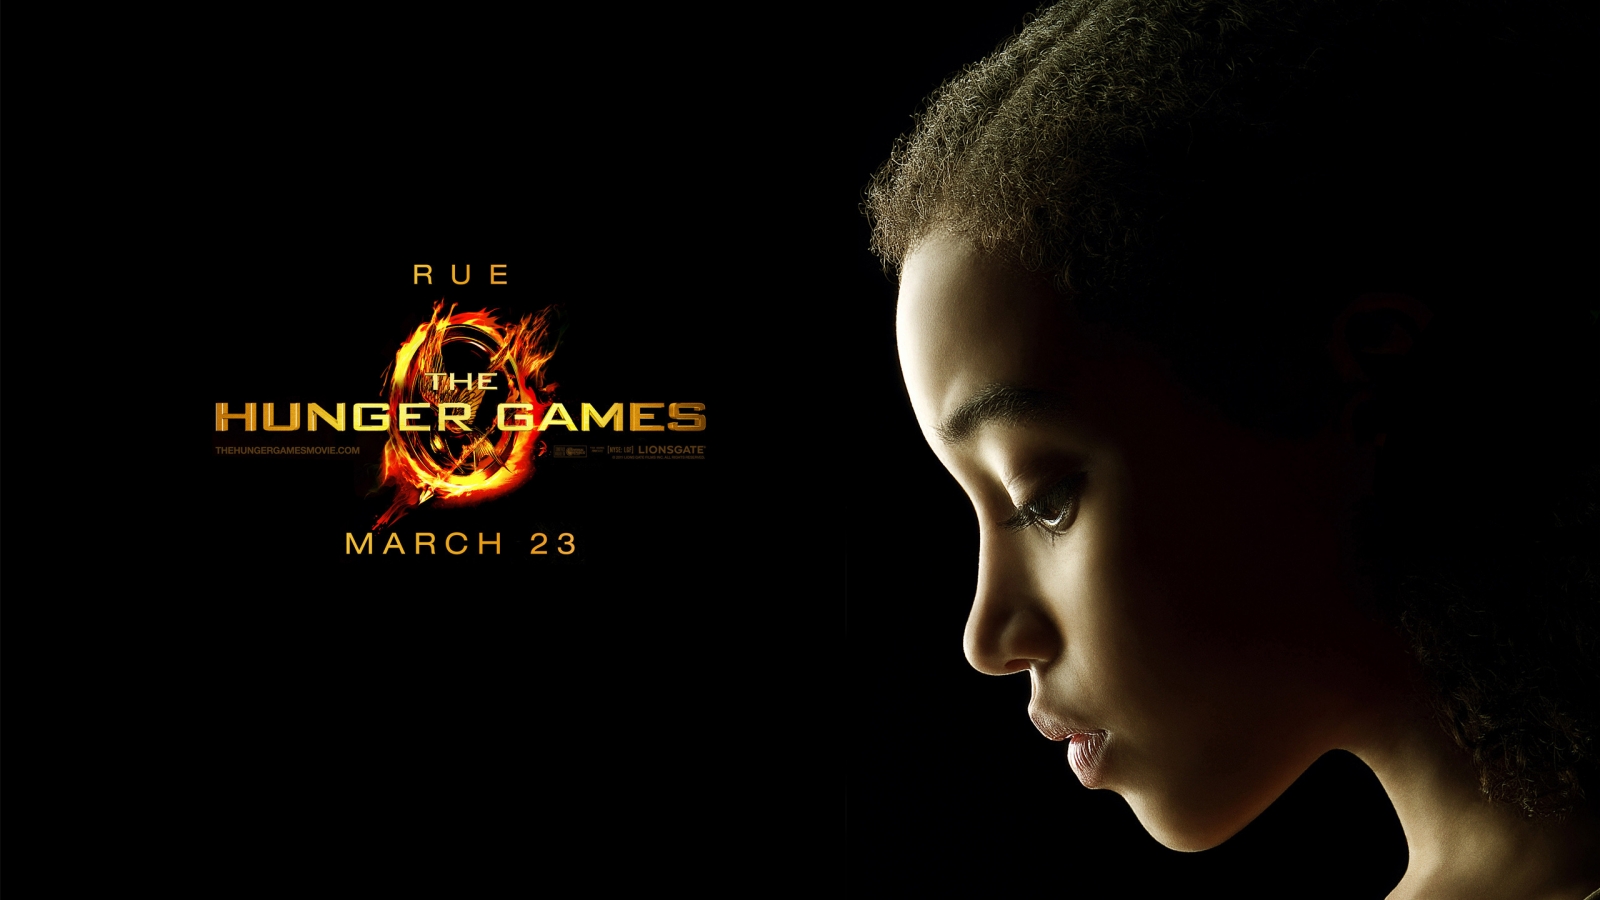 The Hunger Games Rue for 1600 x 900 HDTV resolution